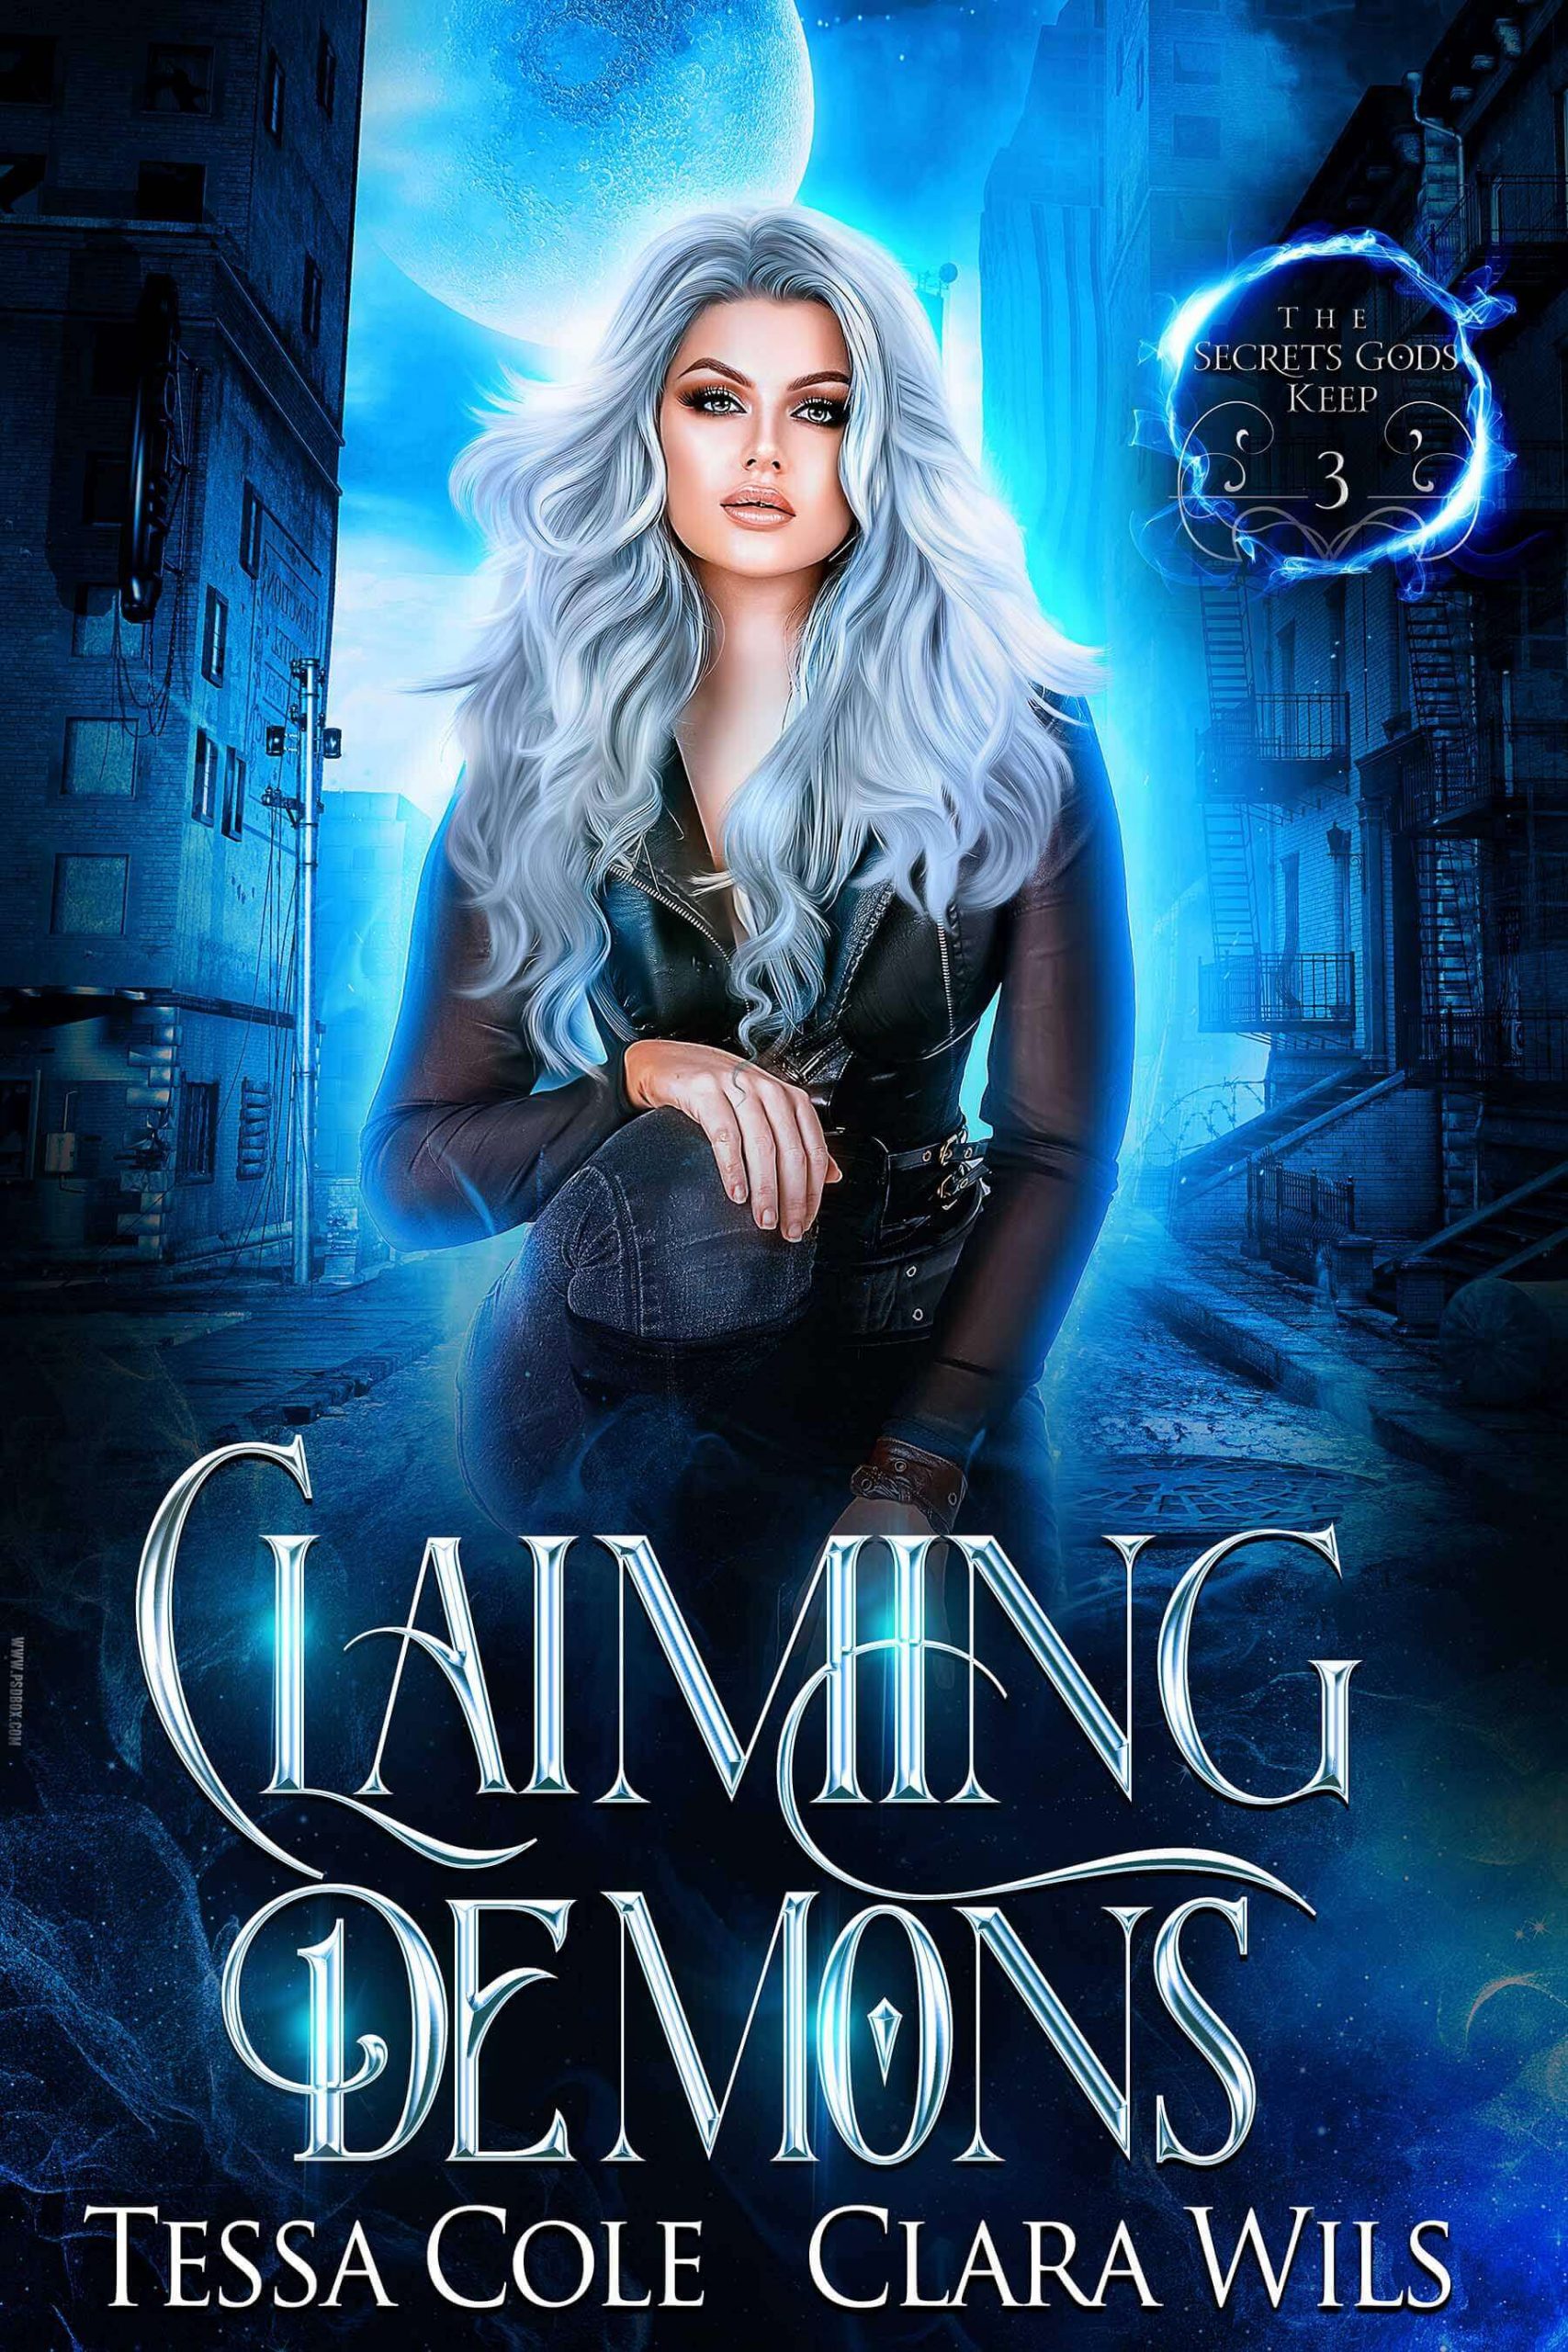 Claiming Demons, a reverse harem paranormal romance and the third book and final book in the Secrets Gods Keep series by Tessa Cole & Clara Wils